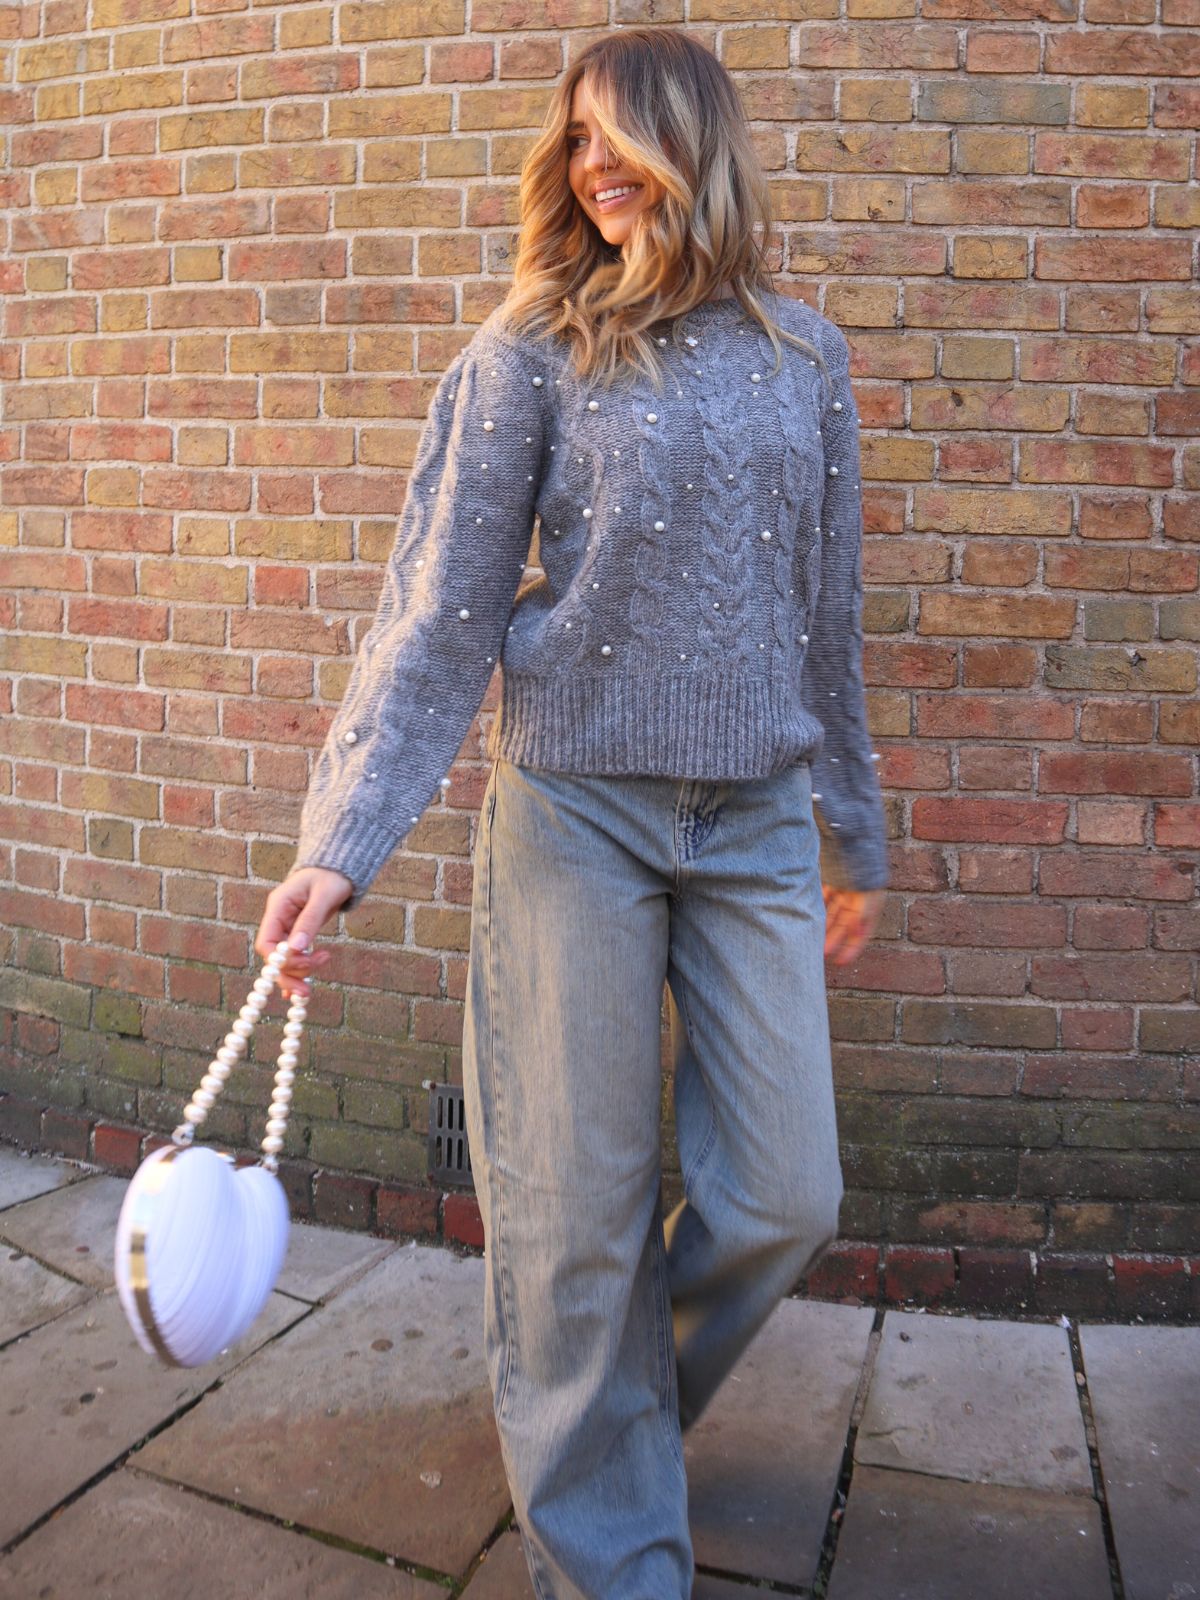 Grey Jumper with Pearls | Ivanna Chunky Cable Knit Jumper